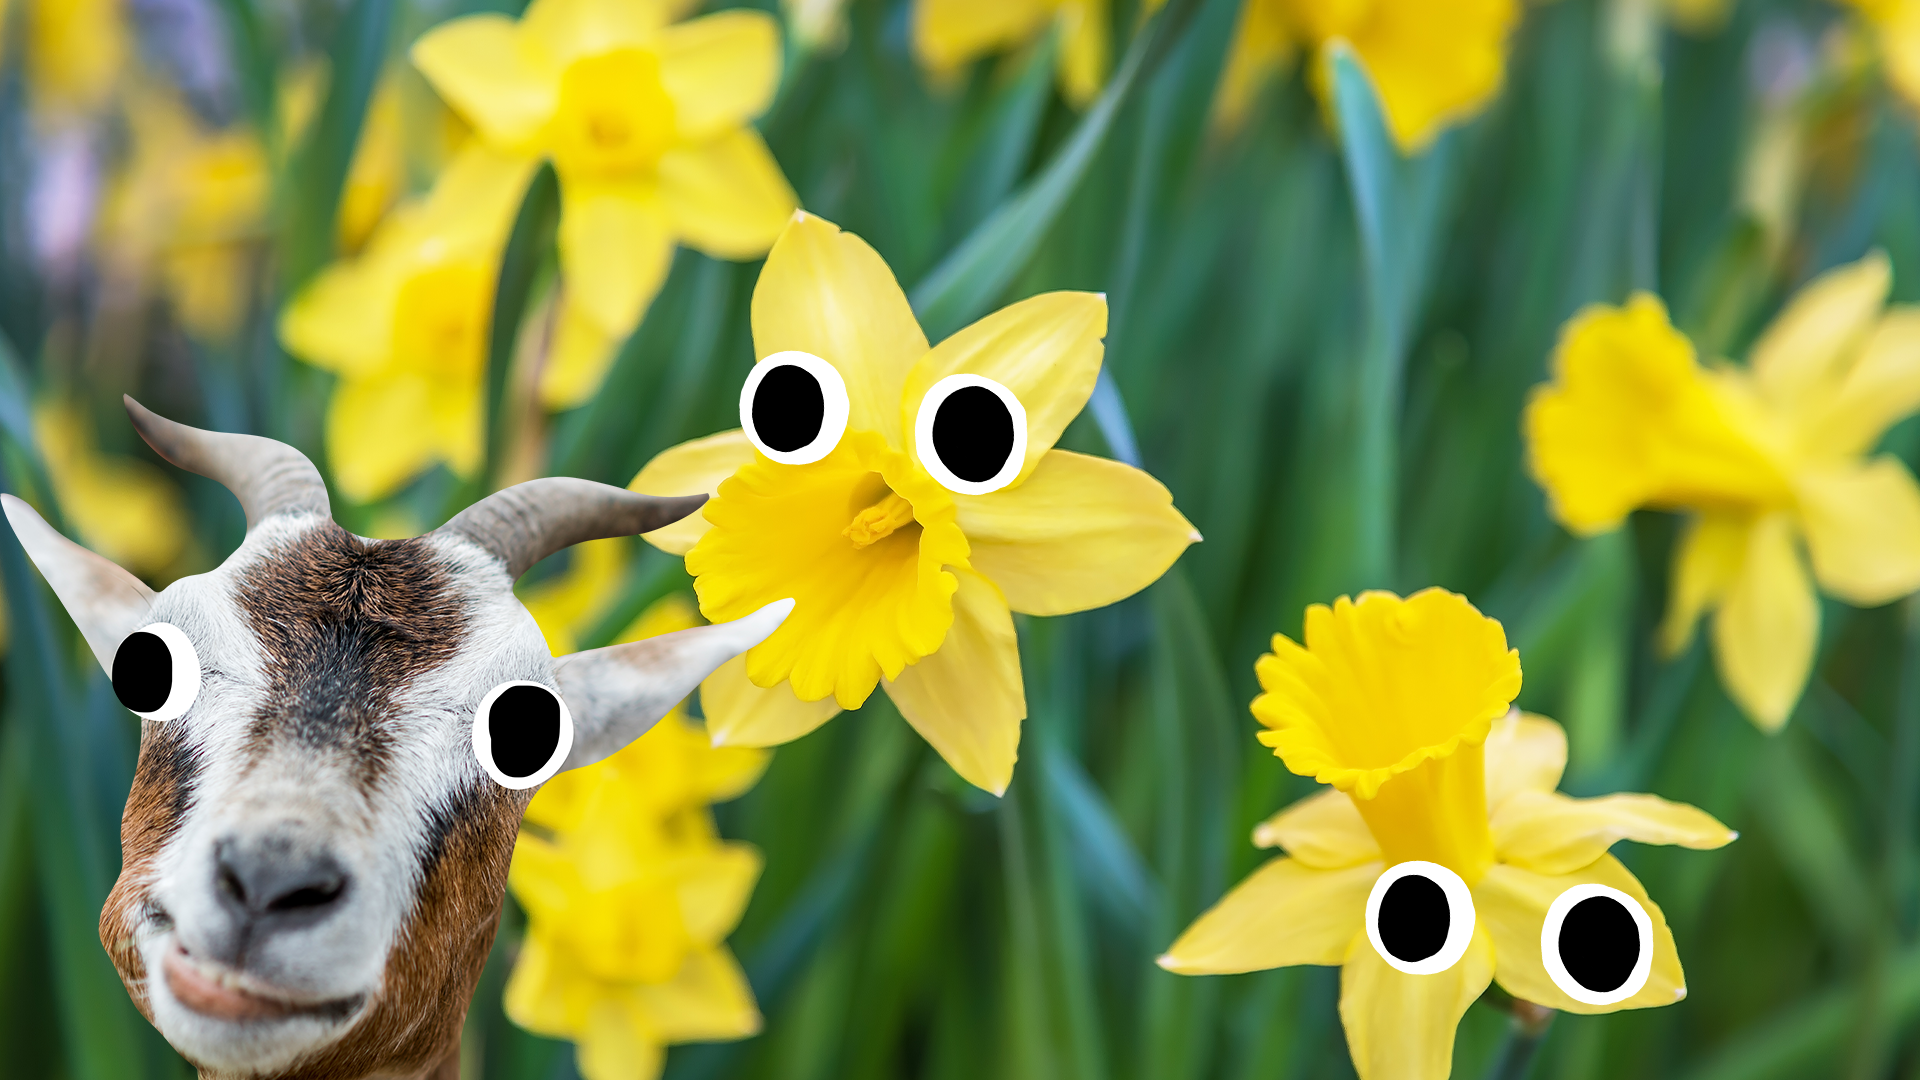 Daffodils with eyes and derpy goat